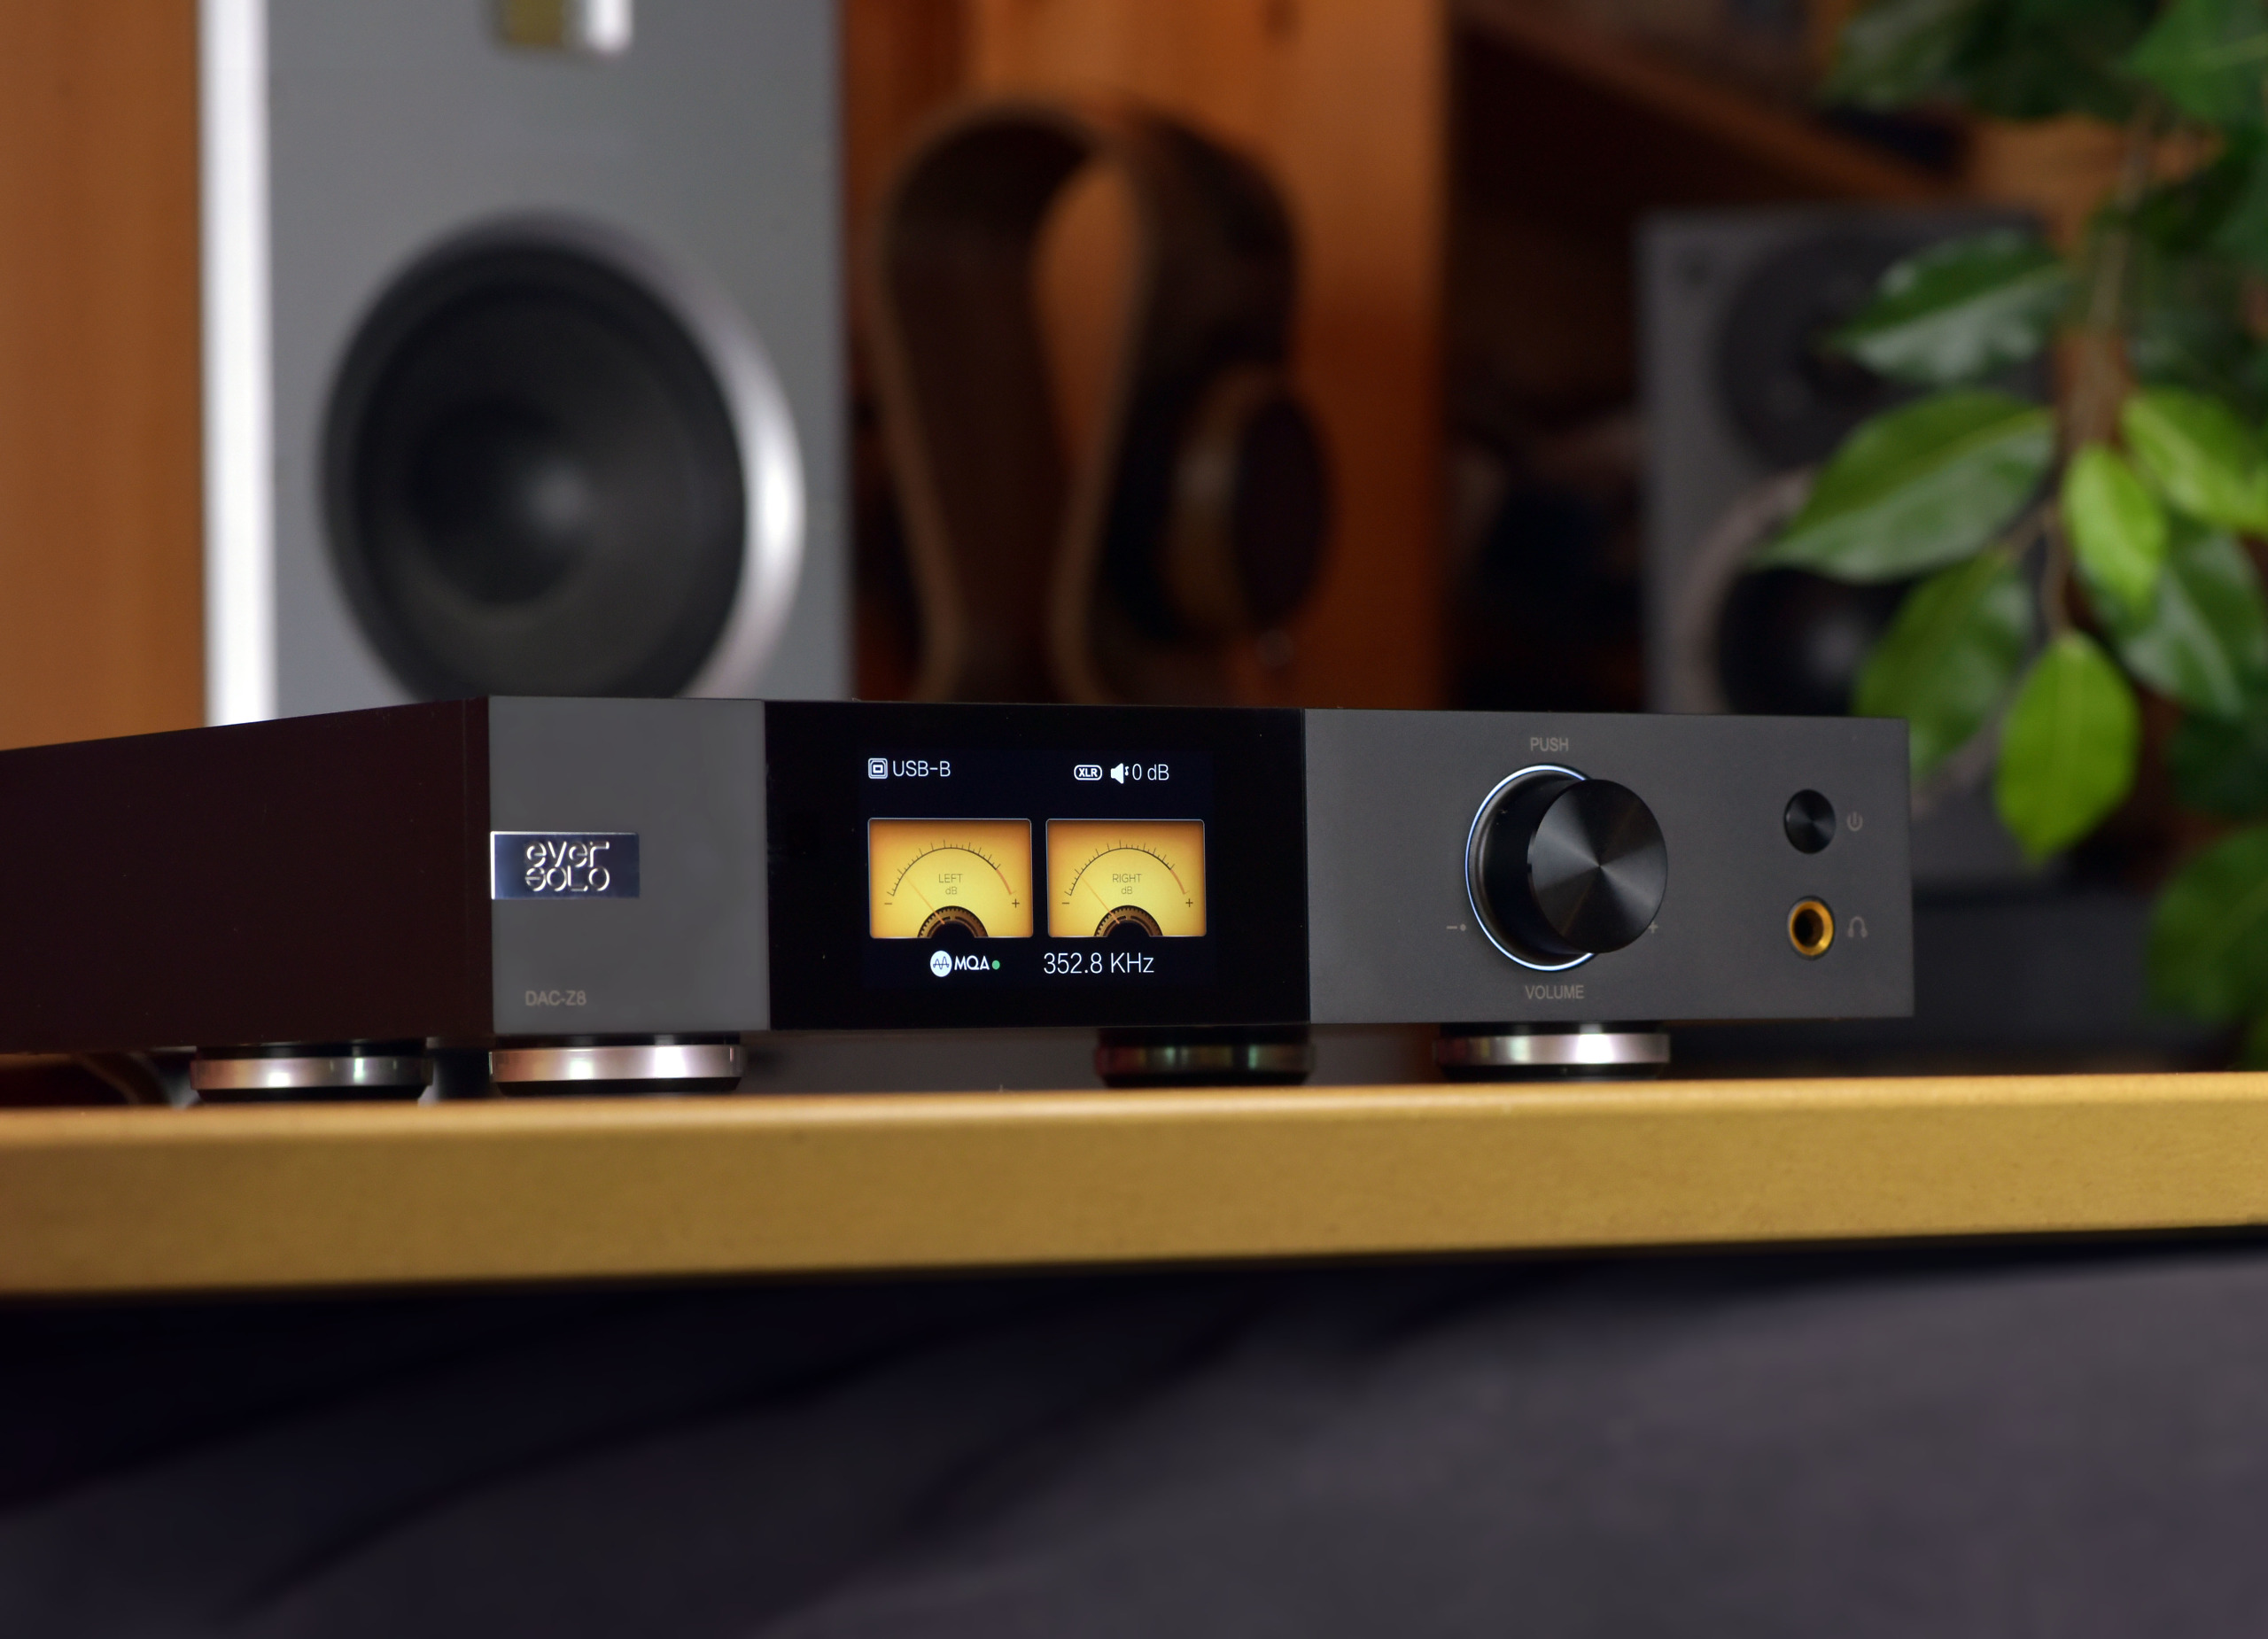 Eversolo DAC-Z8 d/a converter with head-fi output and MQA decoding